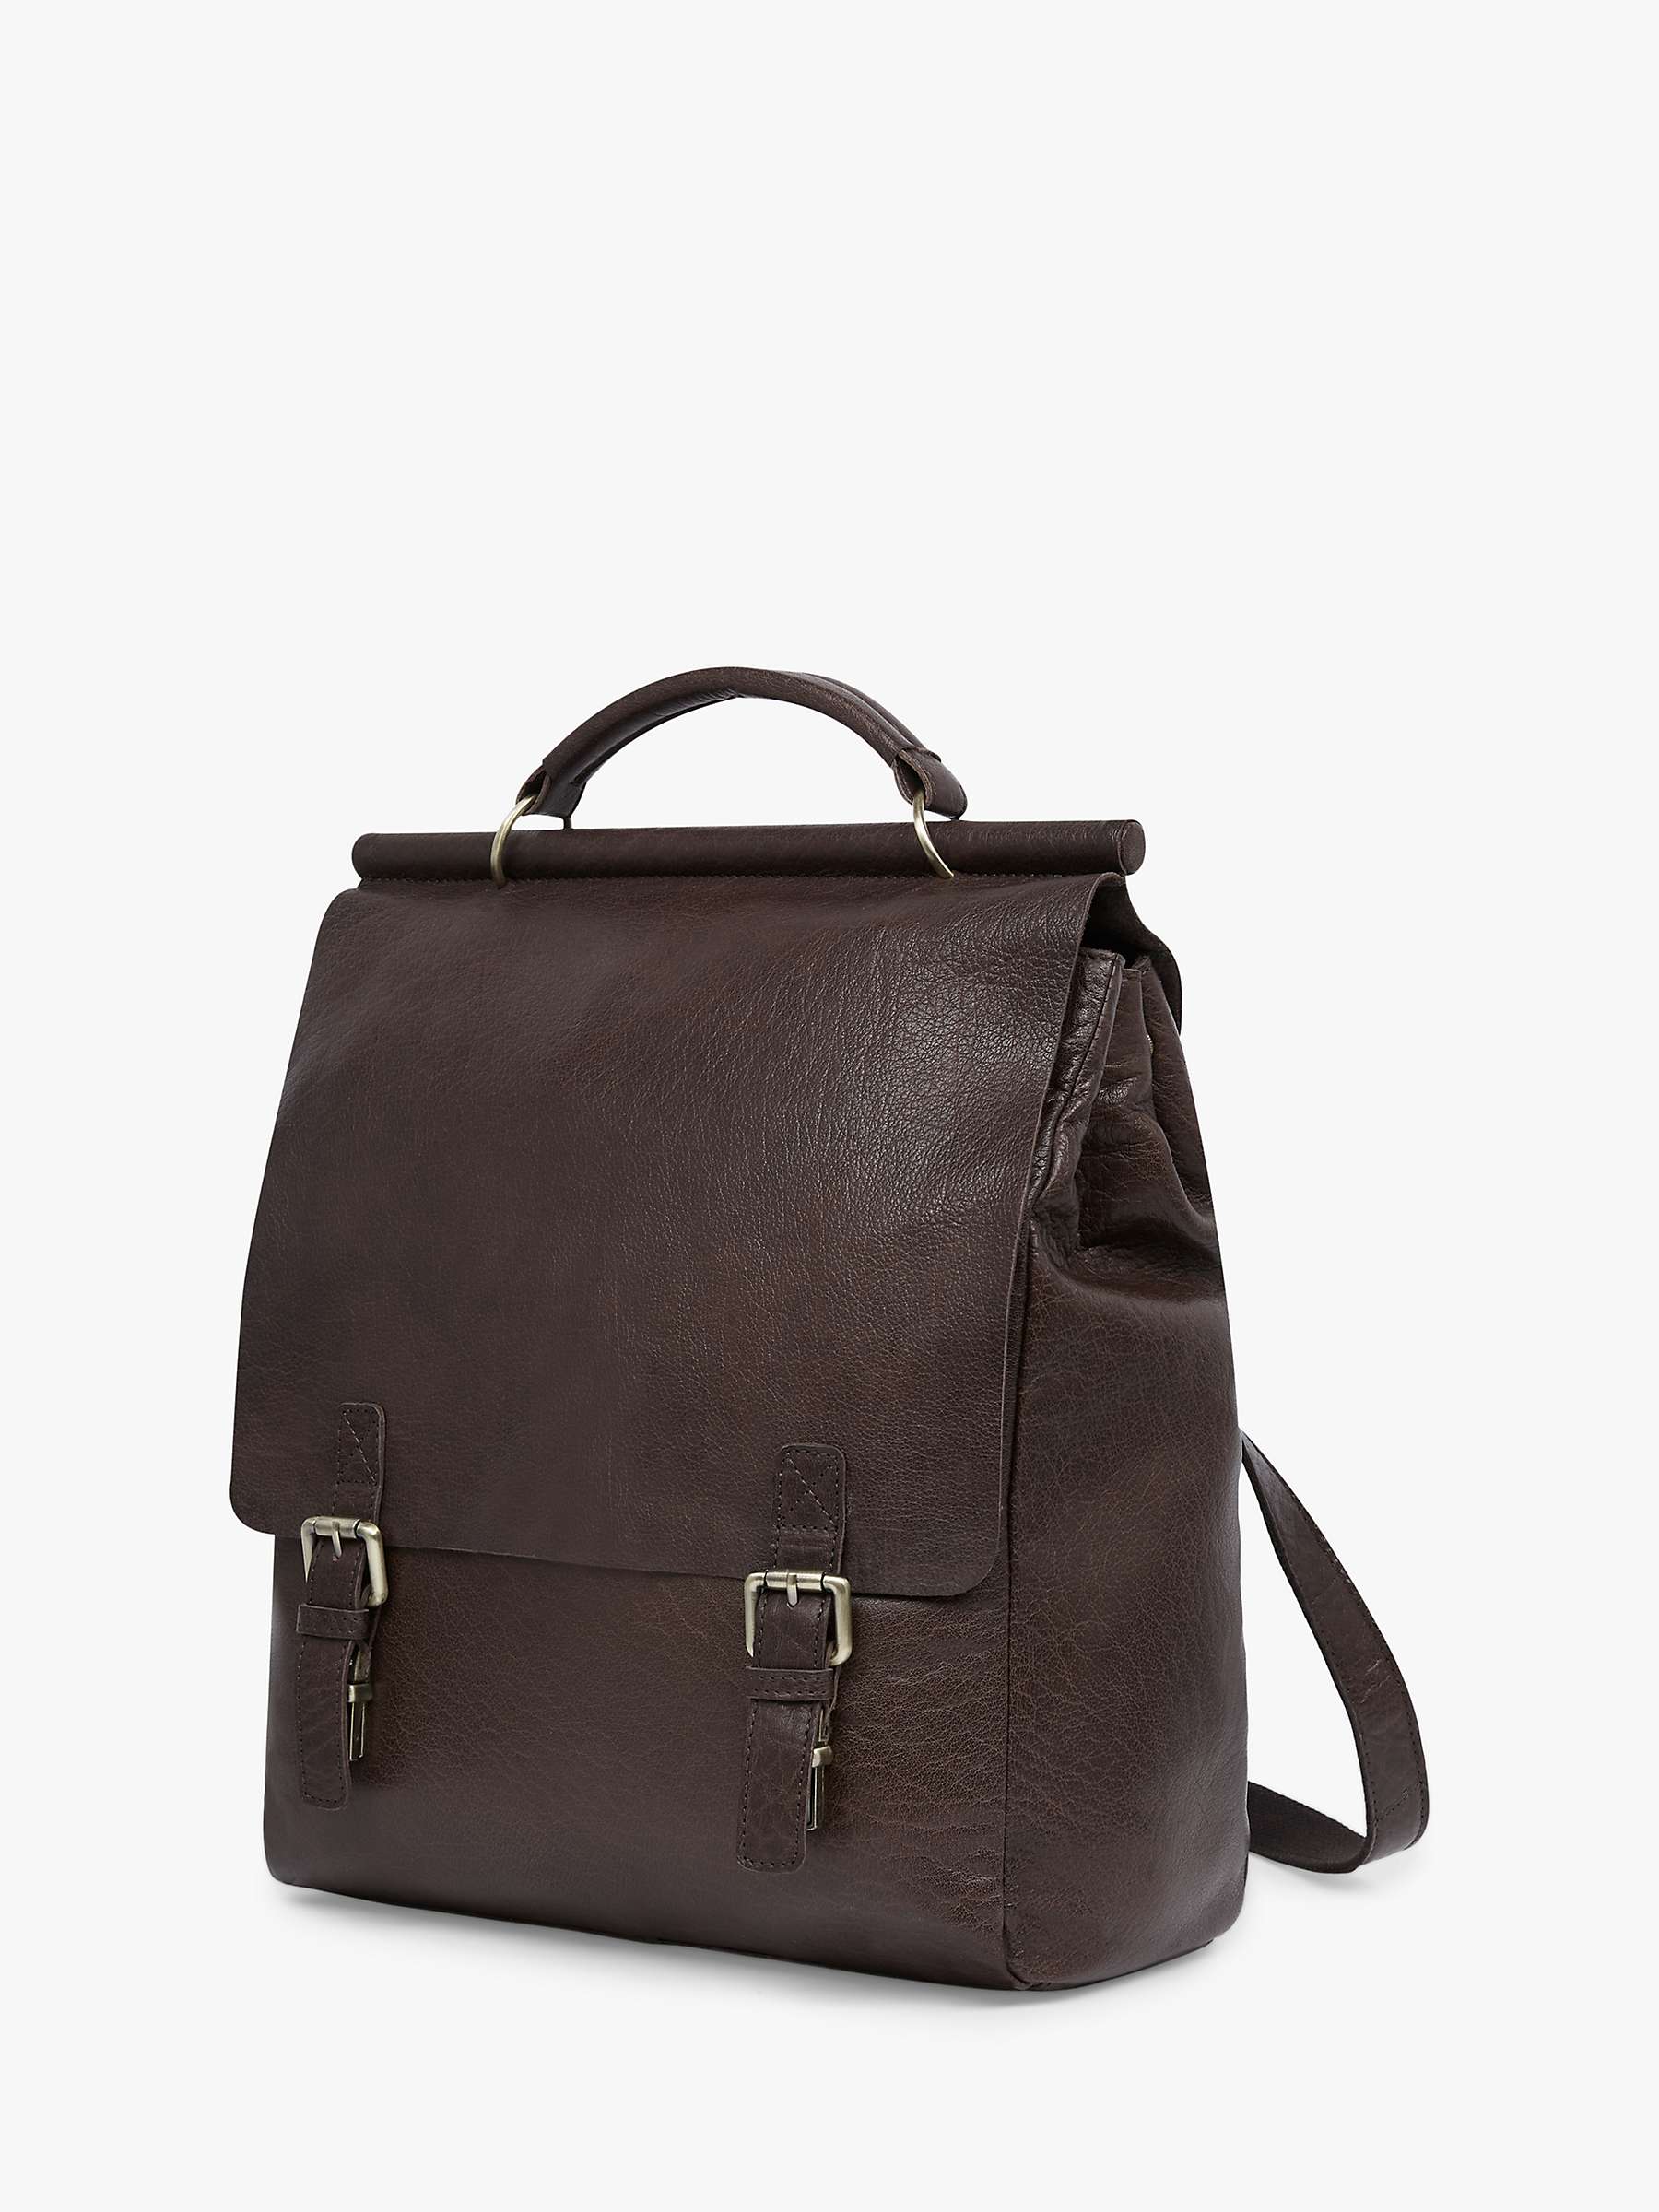 Buy Celtic & Co. Frame Crocodile Embossed Leather Rucksack, Tanners Brown Online at johnlewis.com